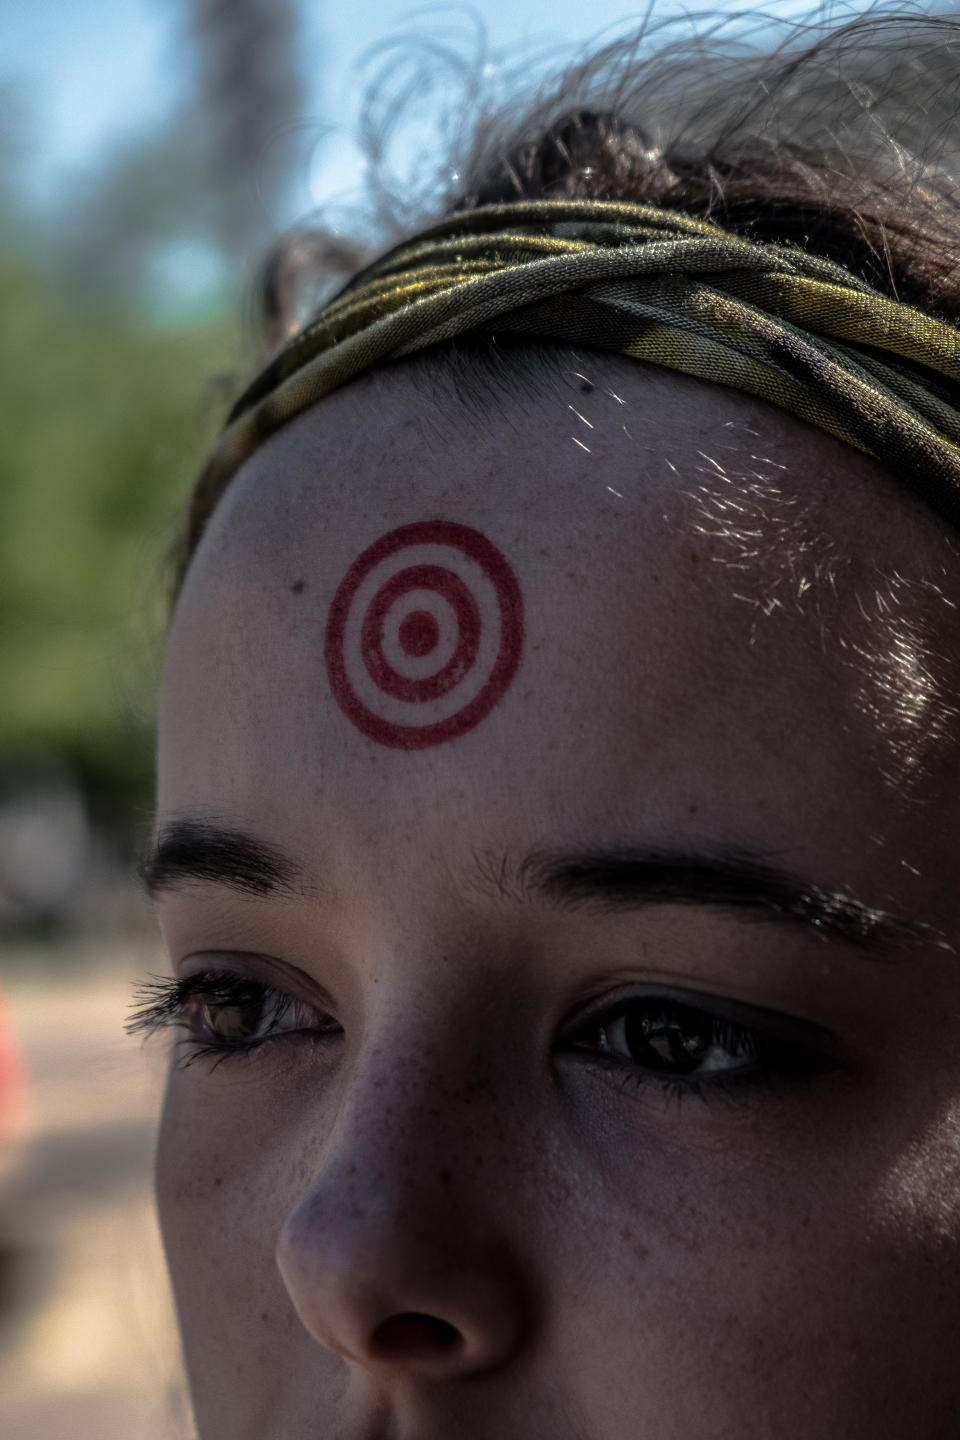 Julia Heilrayne, a student at Austin High School, stands with a target painted on her head at&nbsp;a gun control rally&nbsp;outside Dallas City Hall on&nbsp;Saturday.